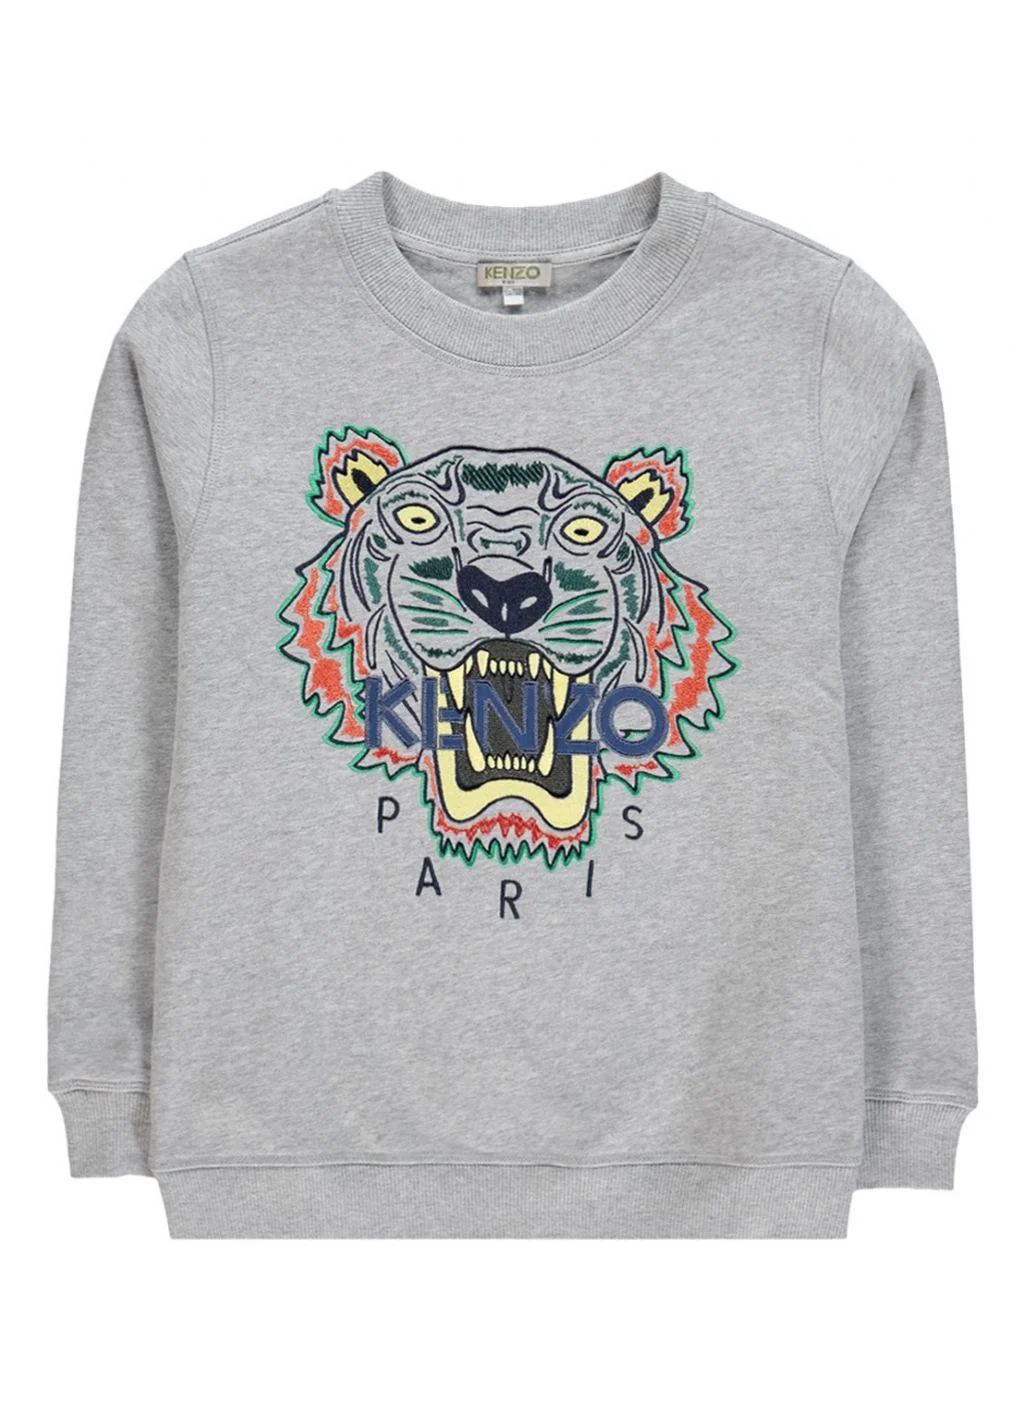 Mode Musthaves | Kenzo look-a-like sweater Wibra!